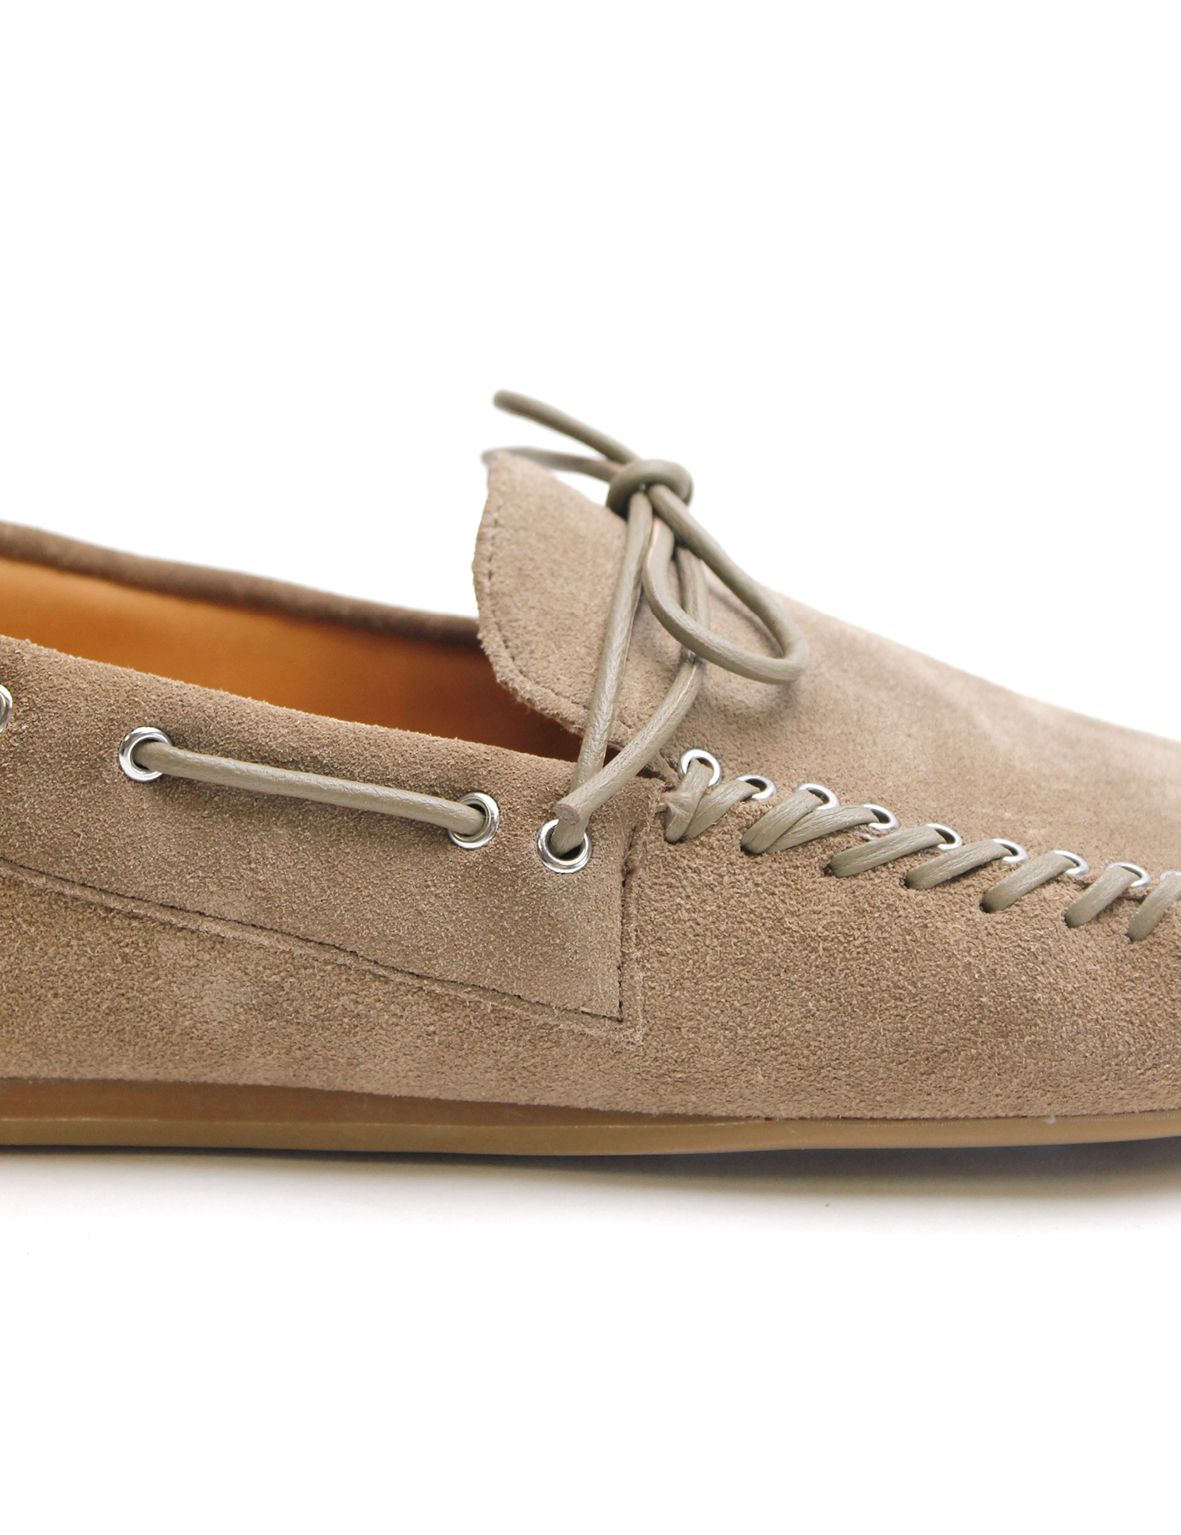 La Tribe | May Moccasin - Olive/Silver